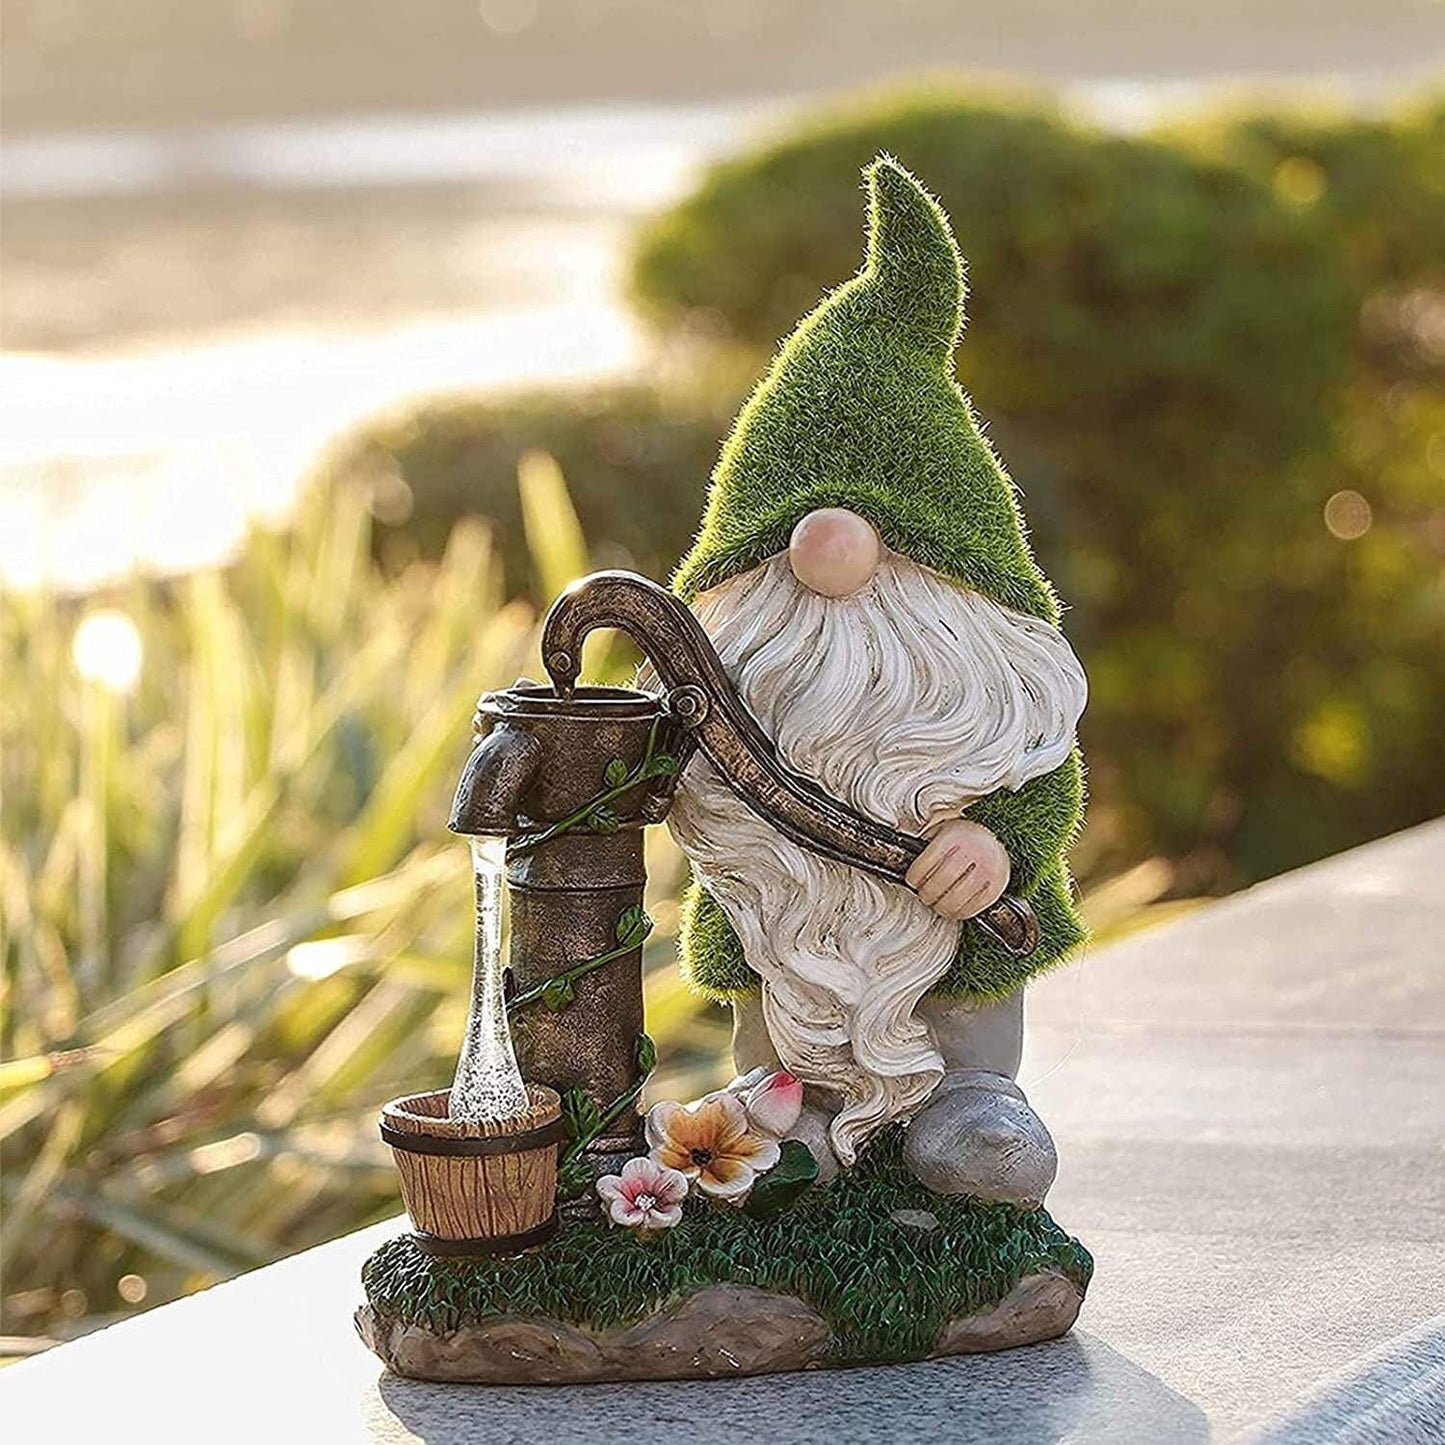 Garden Gnome Statue - Garden Dwarfs Statue Resin Gnome Figurine Outdoor Gnome With Water Pumping Solar Lights for Outdoor Home Yard Decor - Rajbharti Crafts